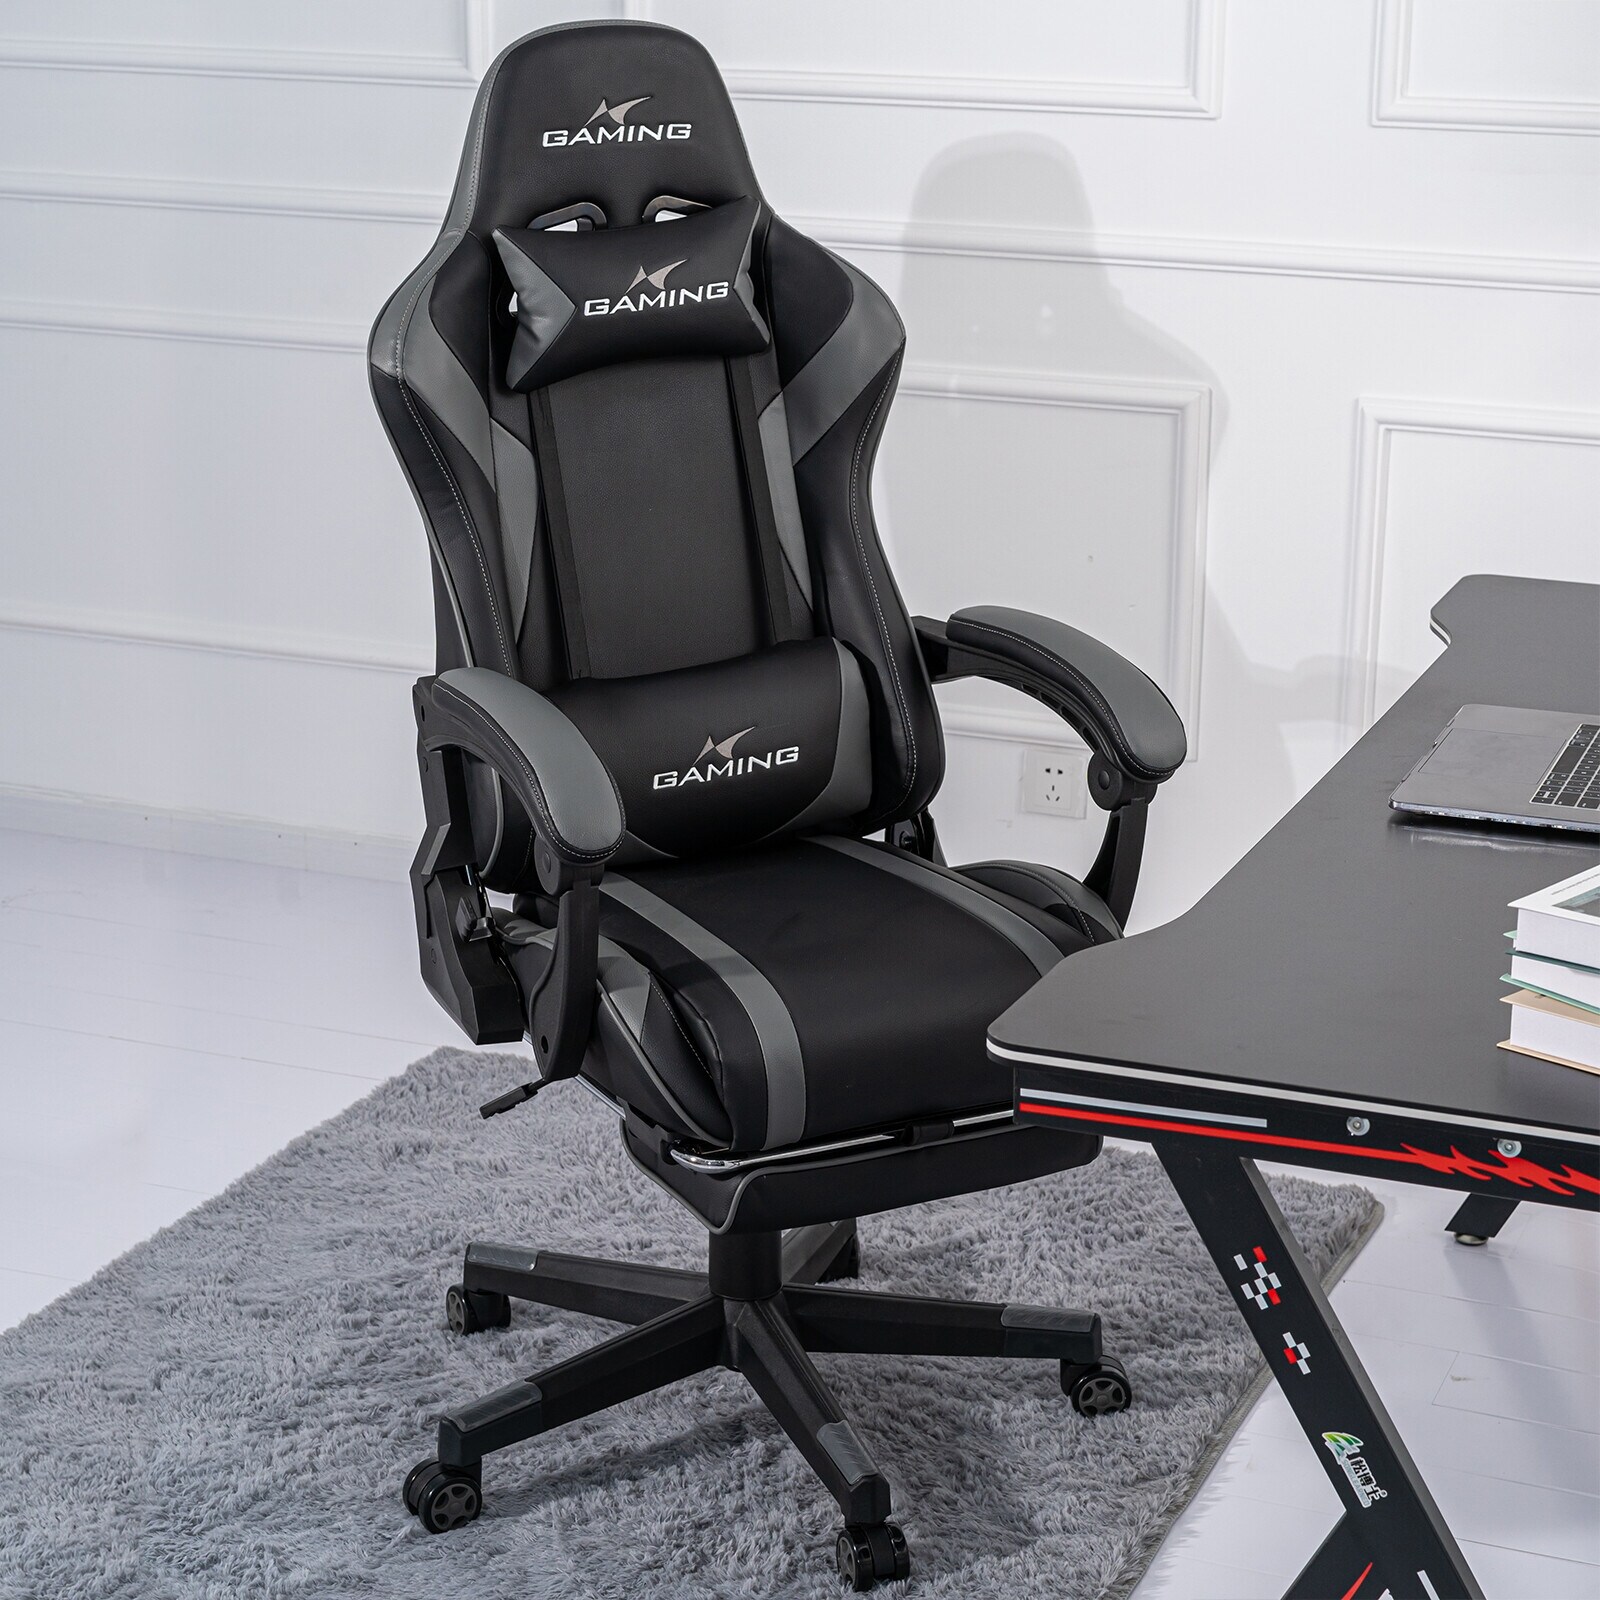 https://ak1.ostkcdn.com/images/products/is/images/direct/081030c3352c6f5b7f29e8f8880d3d1b9978073e/Commodore-Gaming-Chair-Ergonomic-Adjustable-Height-Swivel-Recliner-with-Adjustable-Armrest-and-Retractable-Footrest.jpg